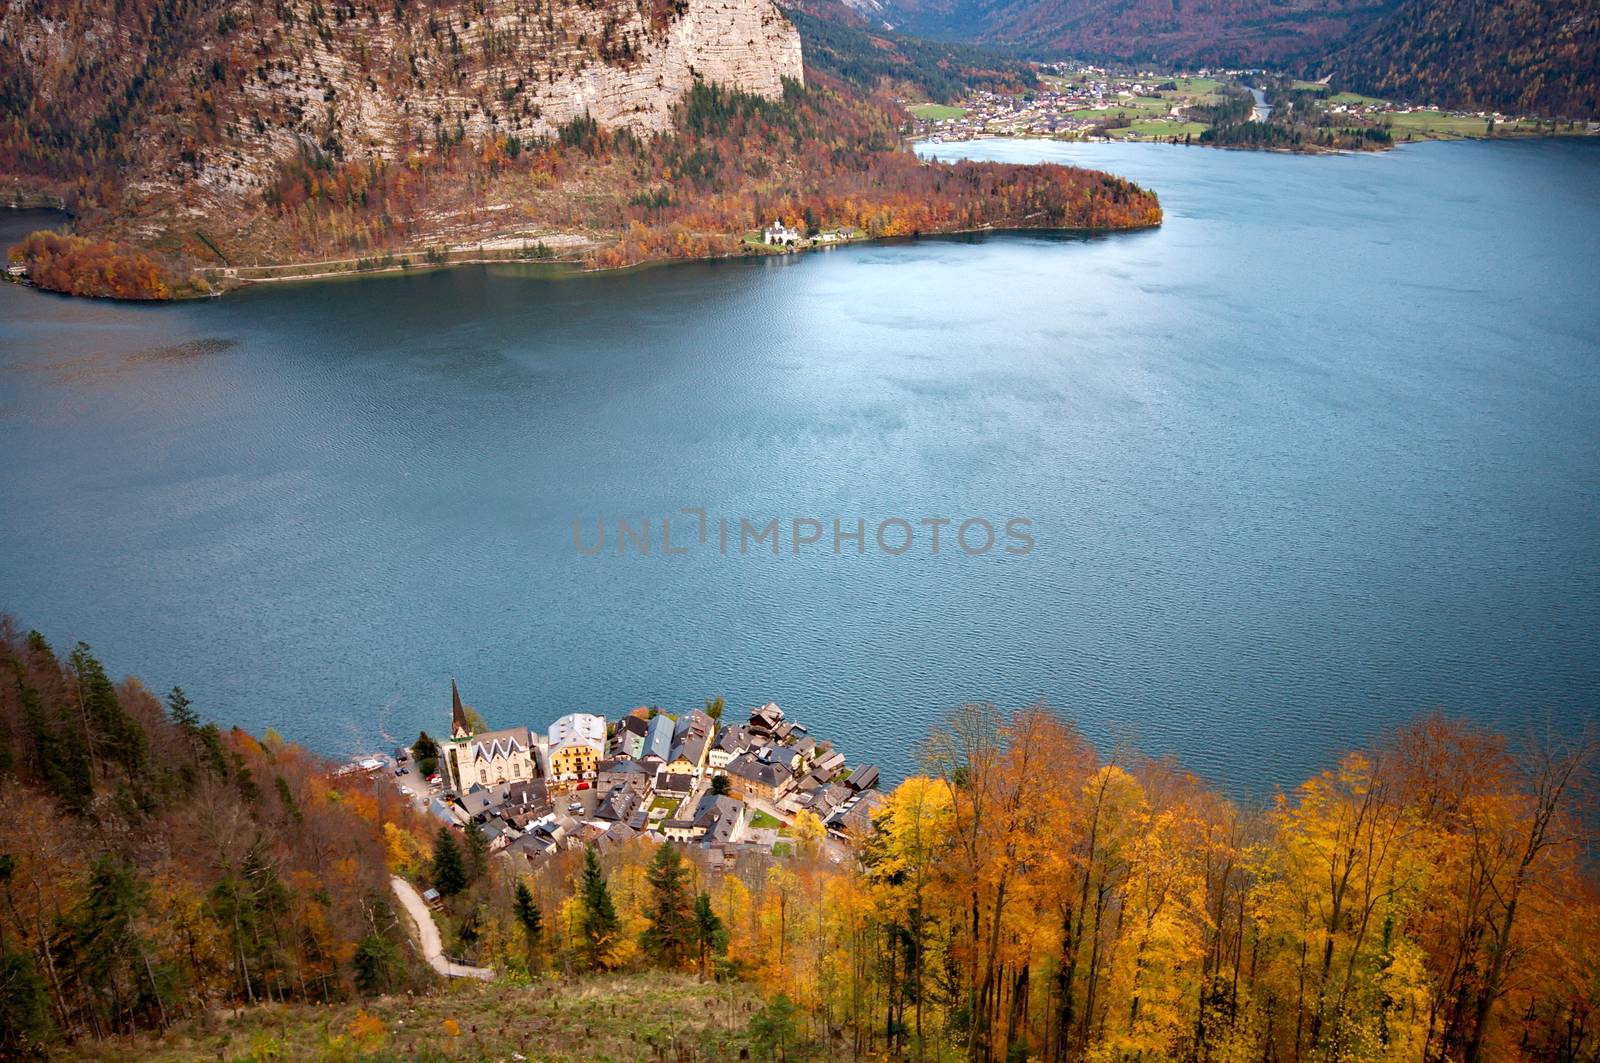 Beautiful village of Hallstatt  on the side of a lake in the Alp by anderm